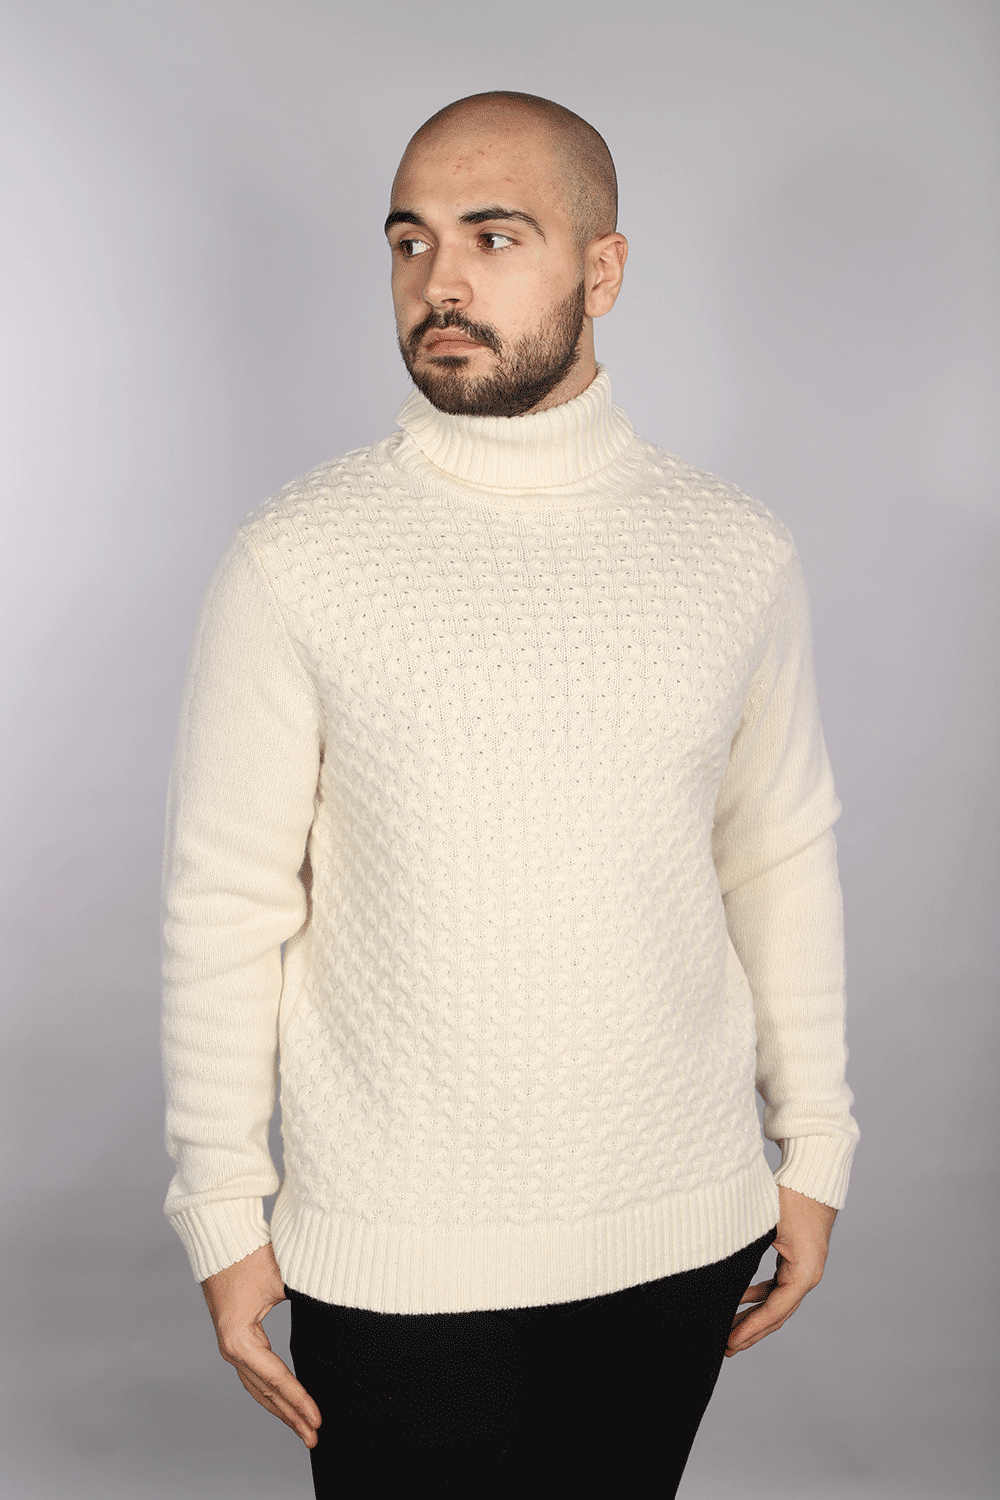 Ecru Cable Knit Turtle Neck - 7 Downie St.®